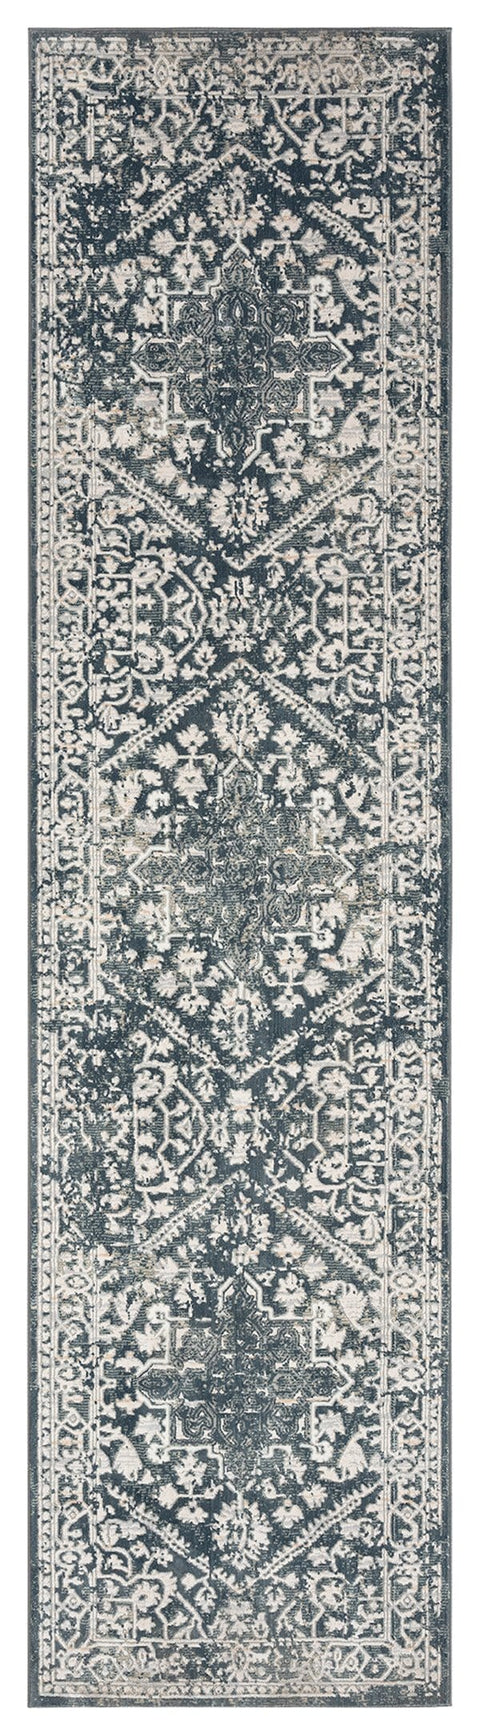 Fahri Charcoal Grey And Ivory Traditional Distressed Runner Rug